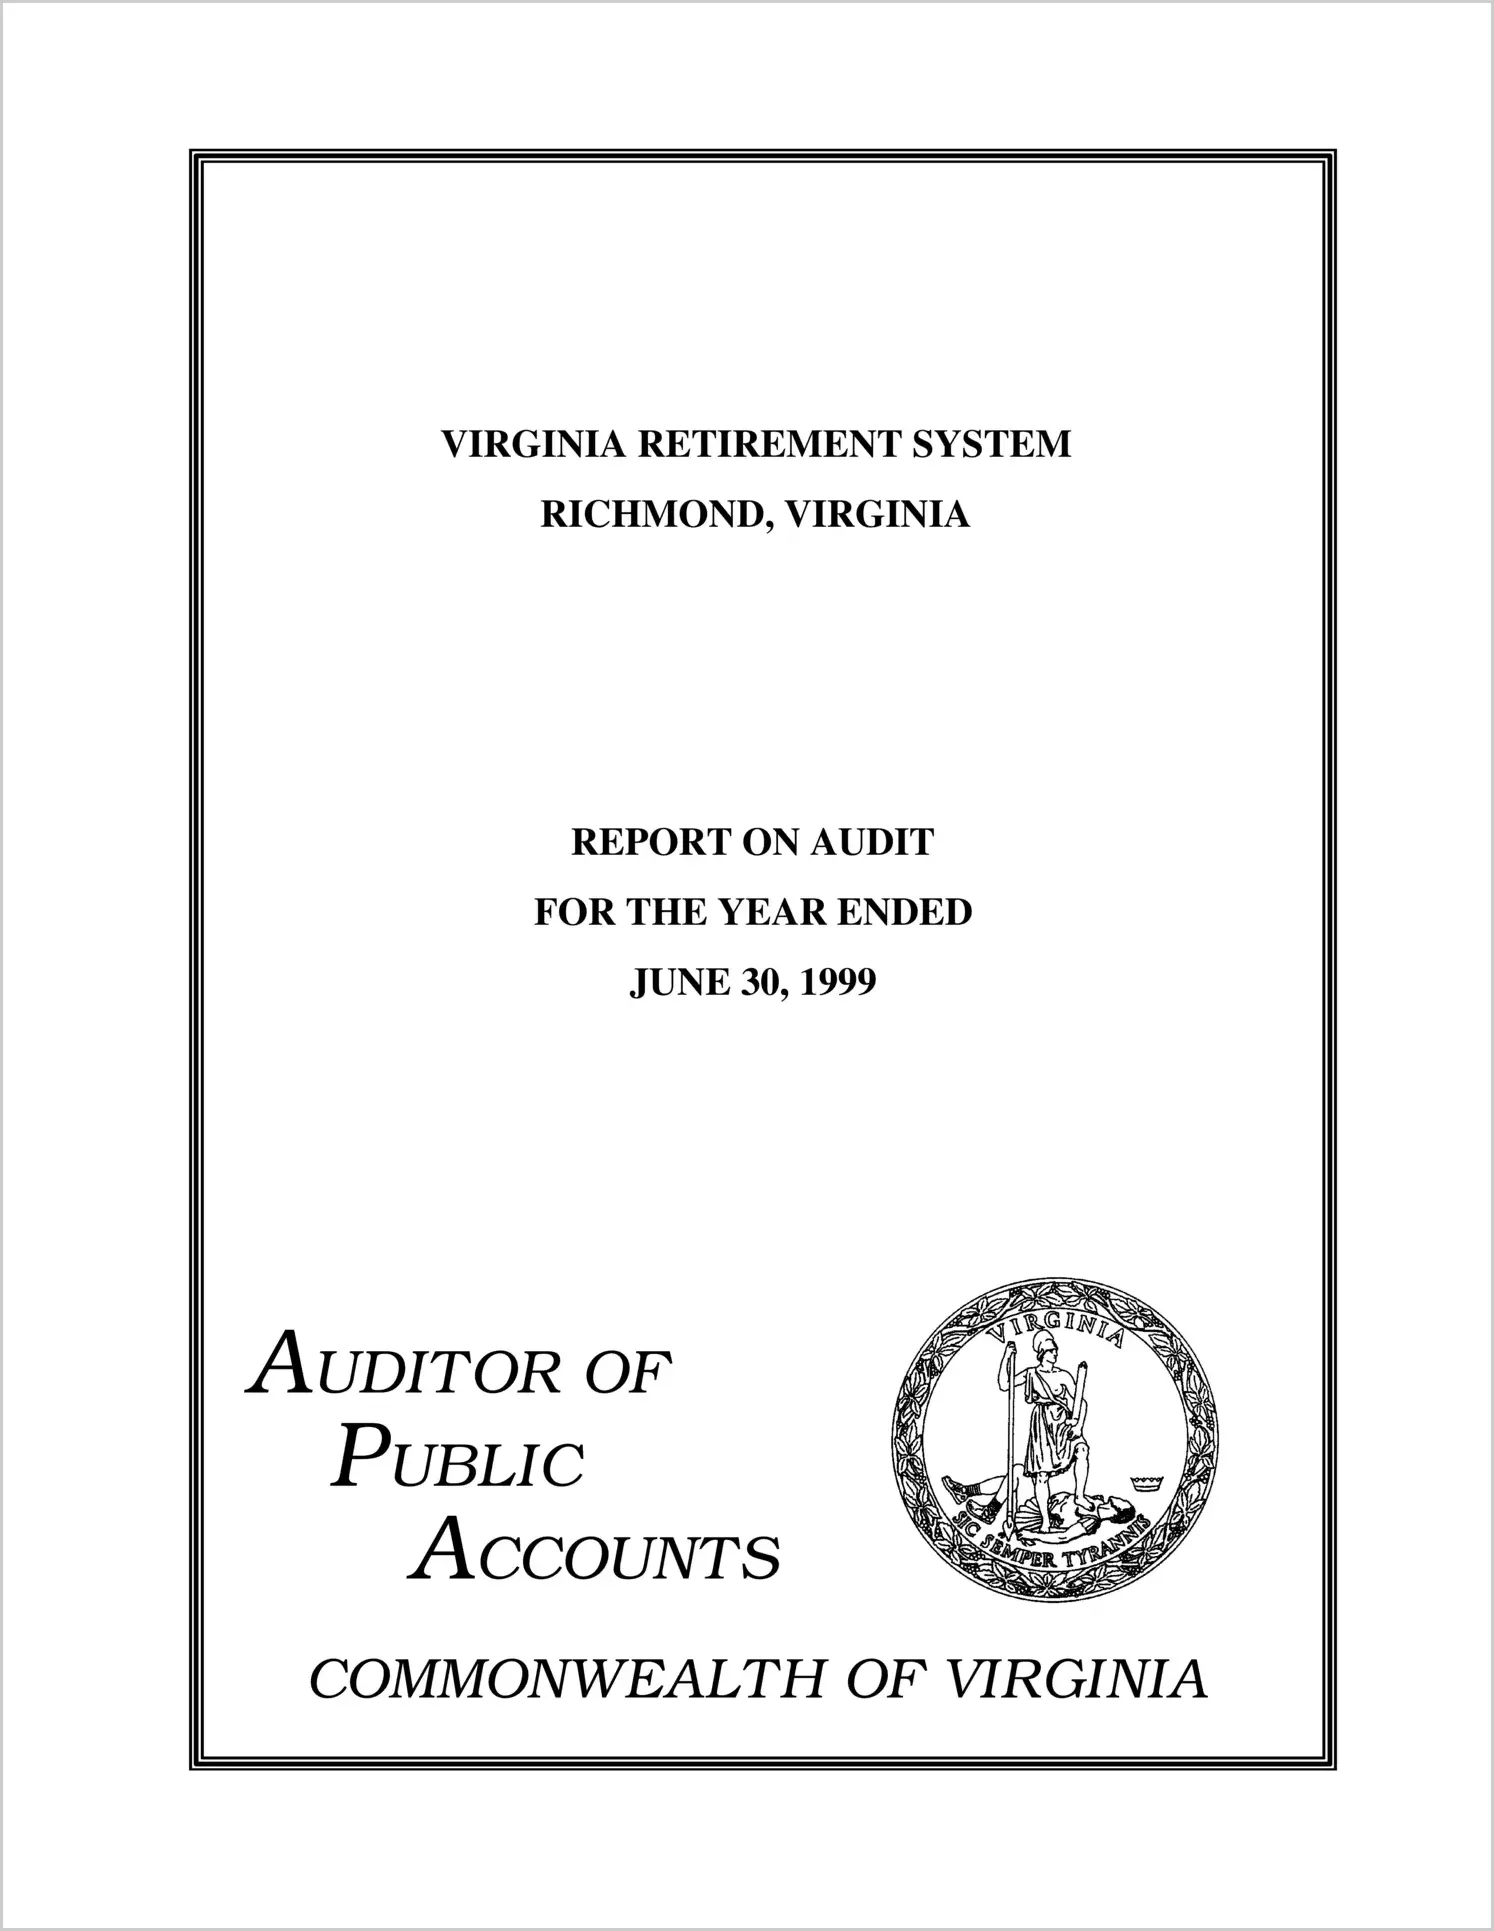 Virginia Retirement System for the year ended June 30, 1999